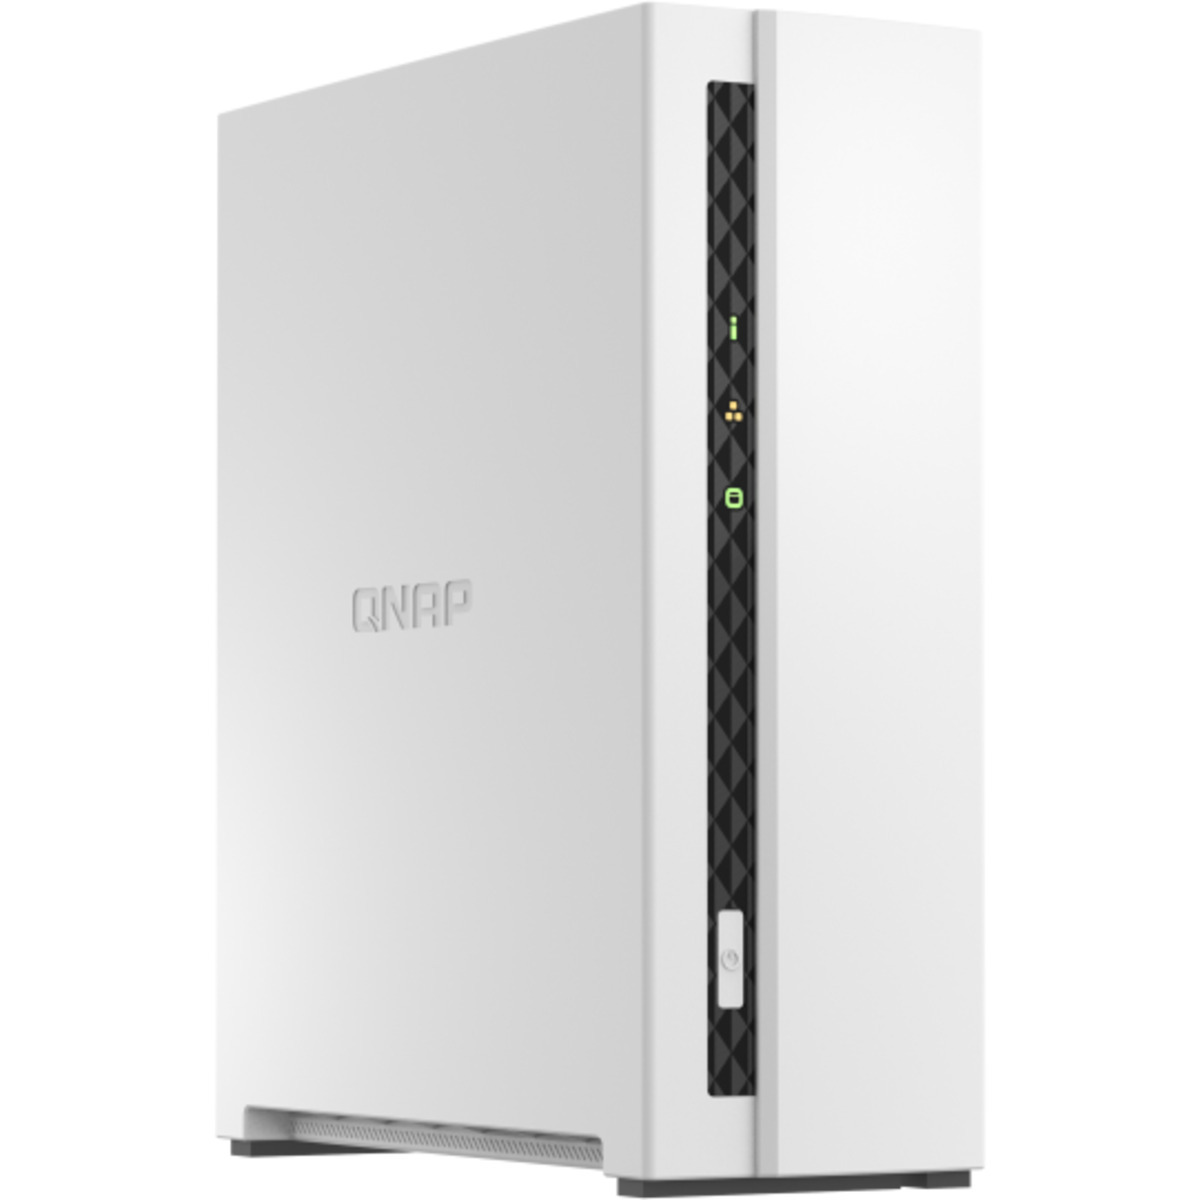 buy $316 QNAP TS-133 2tb Desktop NAS - Network Attached Storage Device 1x2000gb Seagate IronWolf Pro ST2000NT001 3.5 7200rpm SATA 6Gb/s HDD NAS Class Drives Installed - Burn-In Tested - nas headquarters buy network attached storage server device das new raid-5 free shipping simply usa TS-133